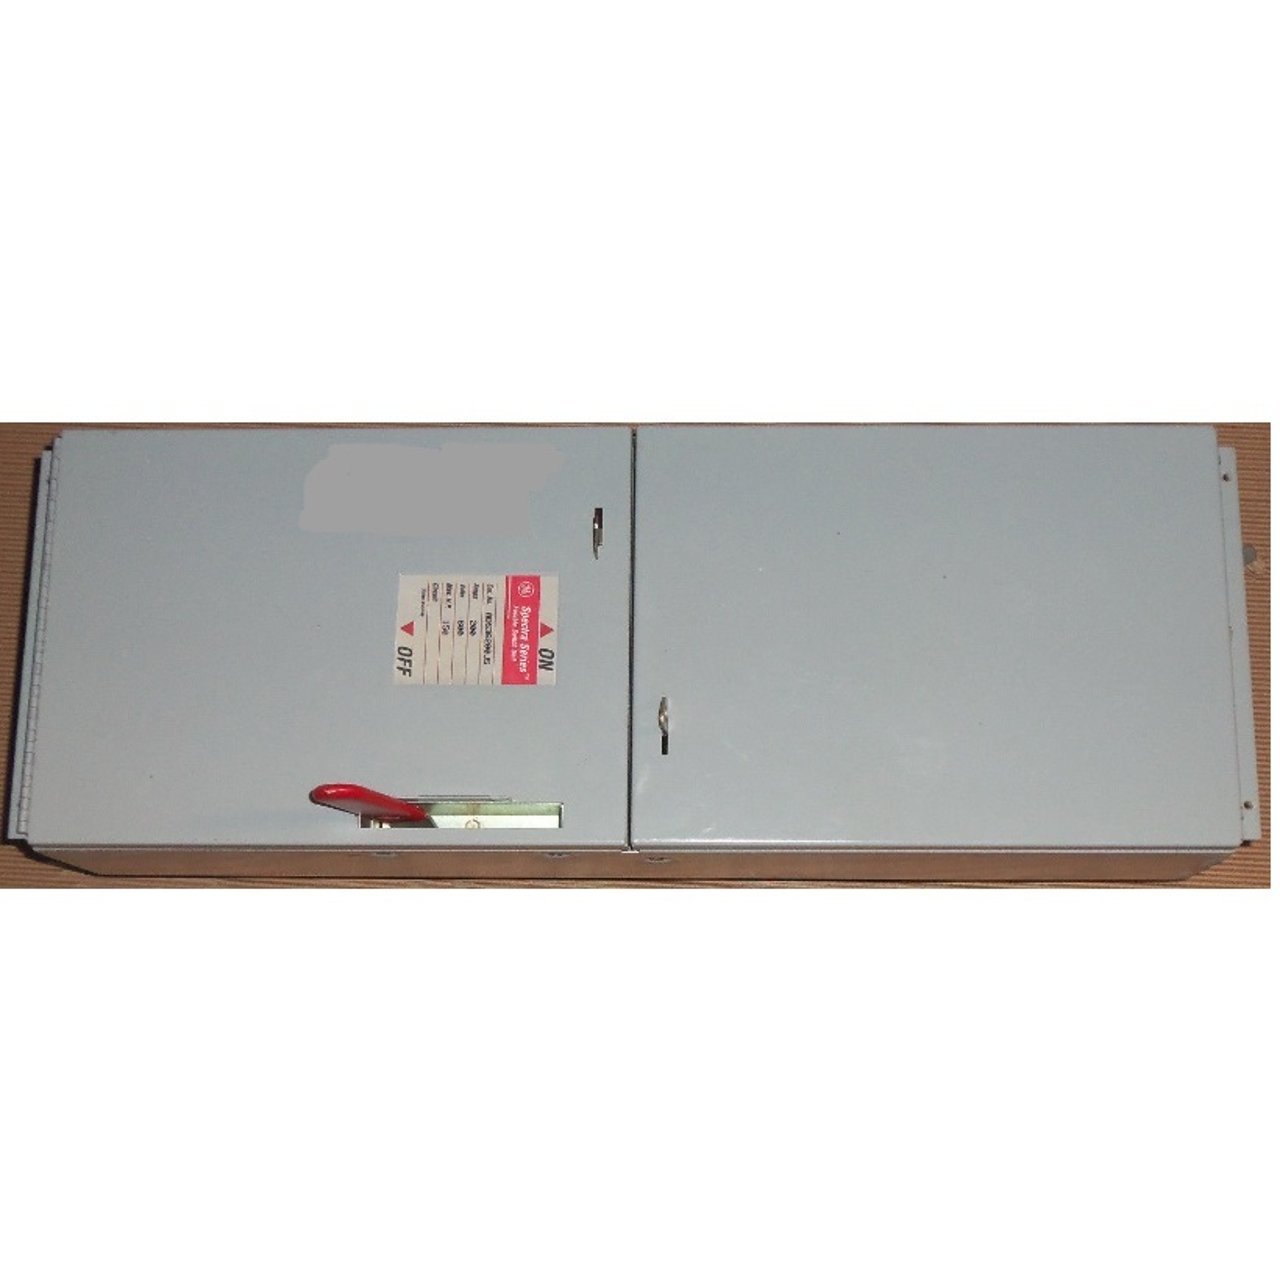 ADS32200HS - General Electrics - Panel Switch